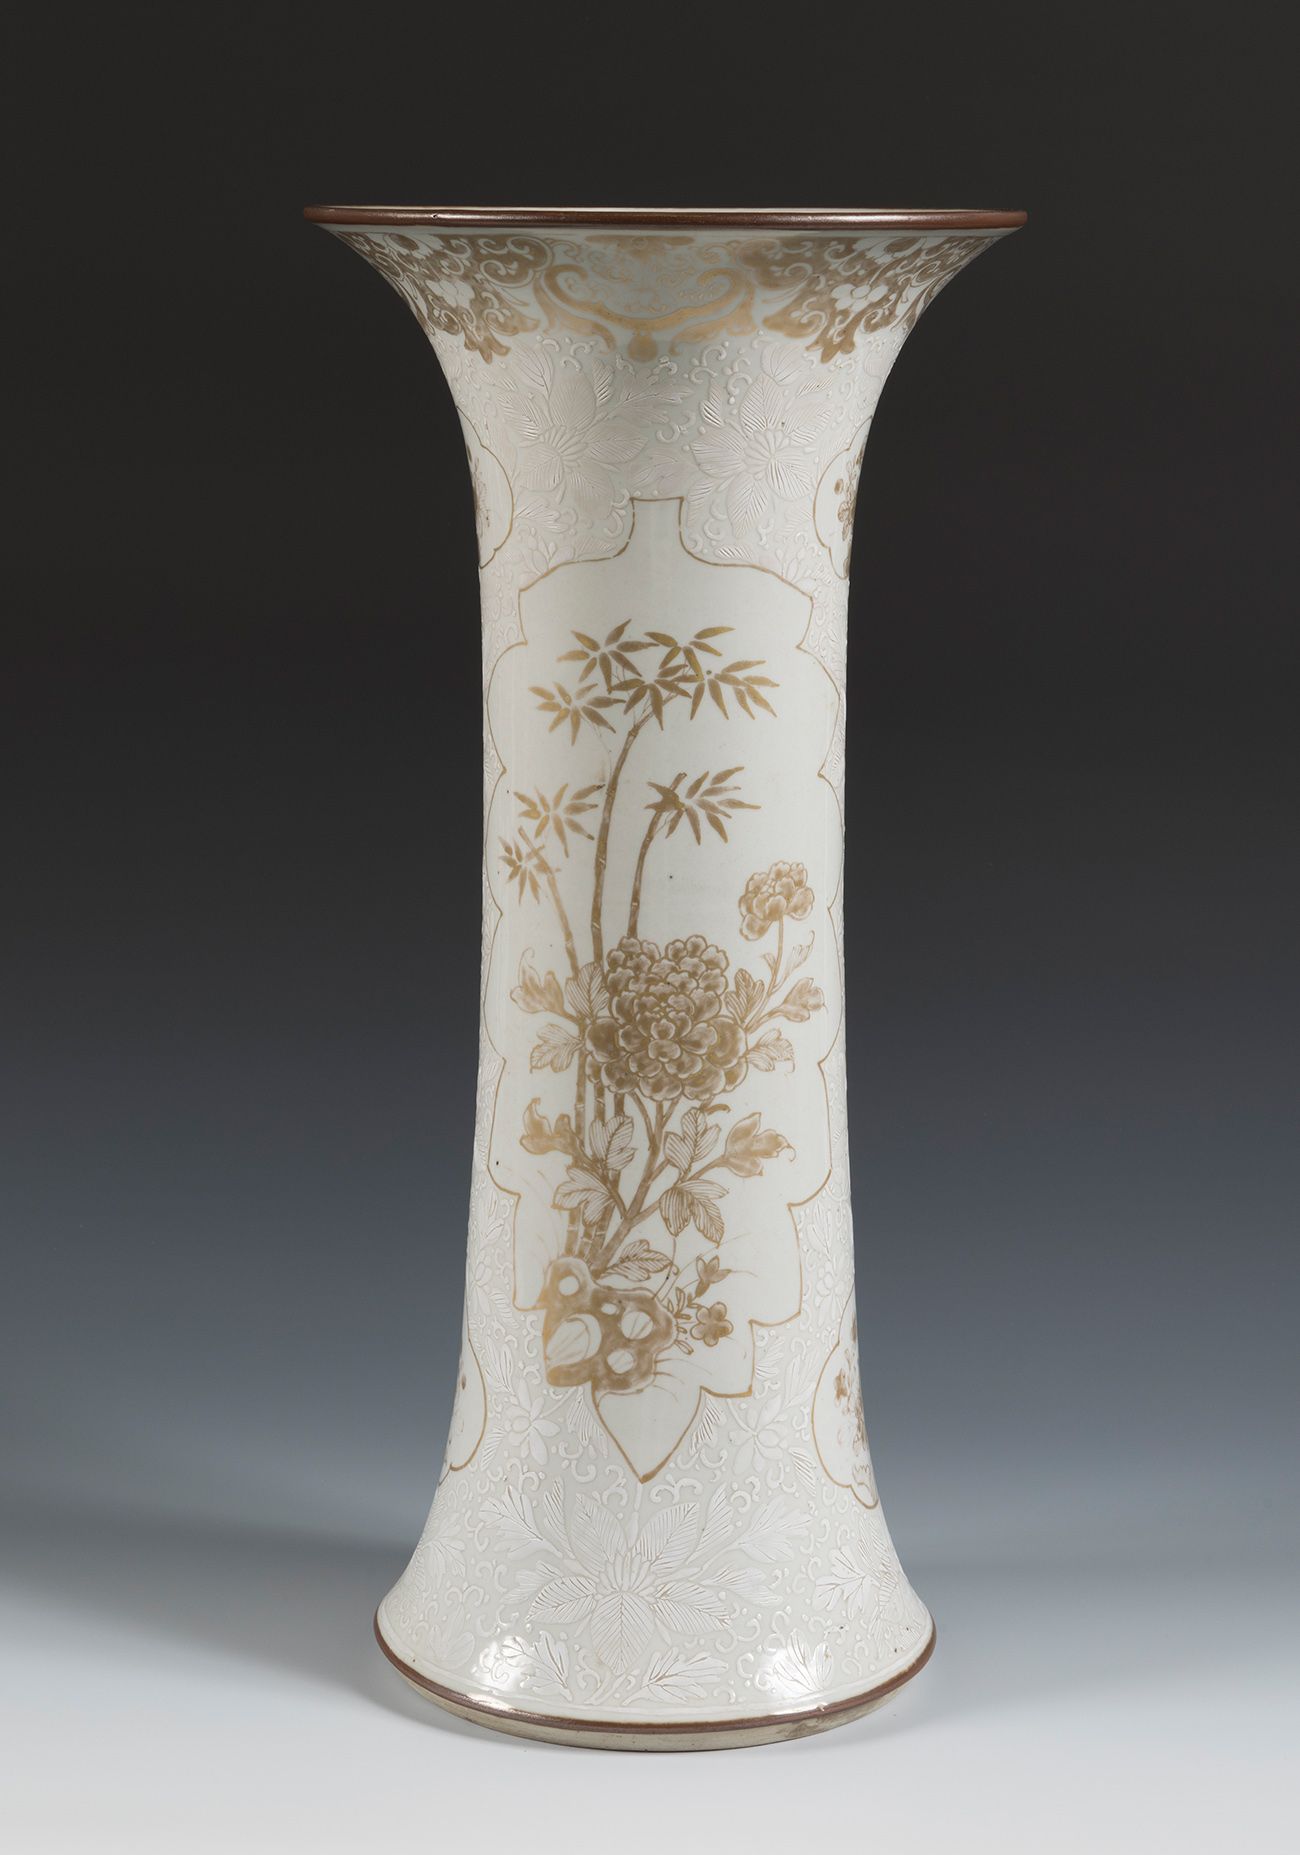 Null Quianlong vase, 18th century.
Porcelain with white on white decoration.
The&hellip;